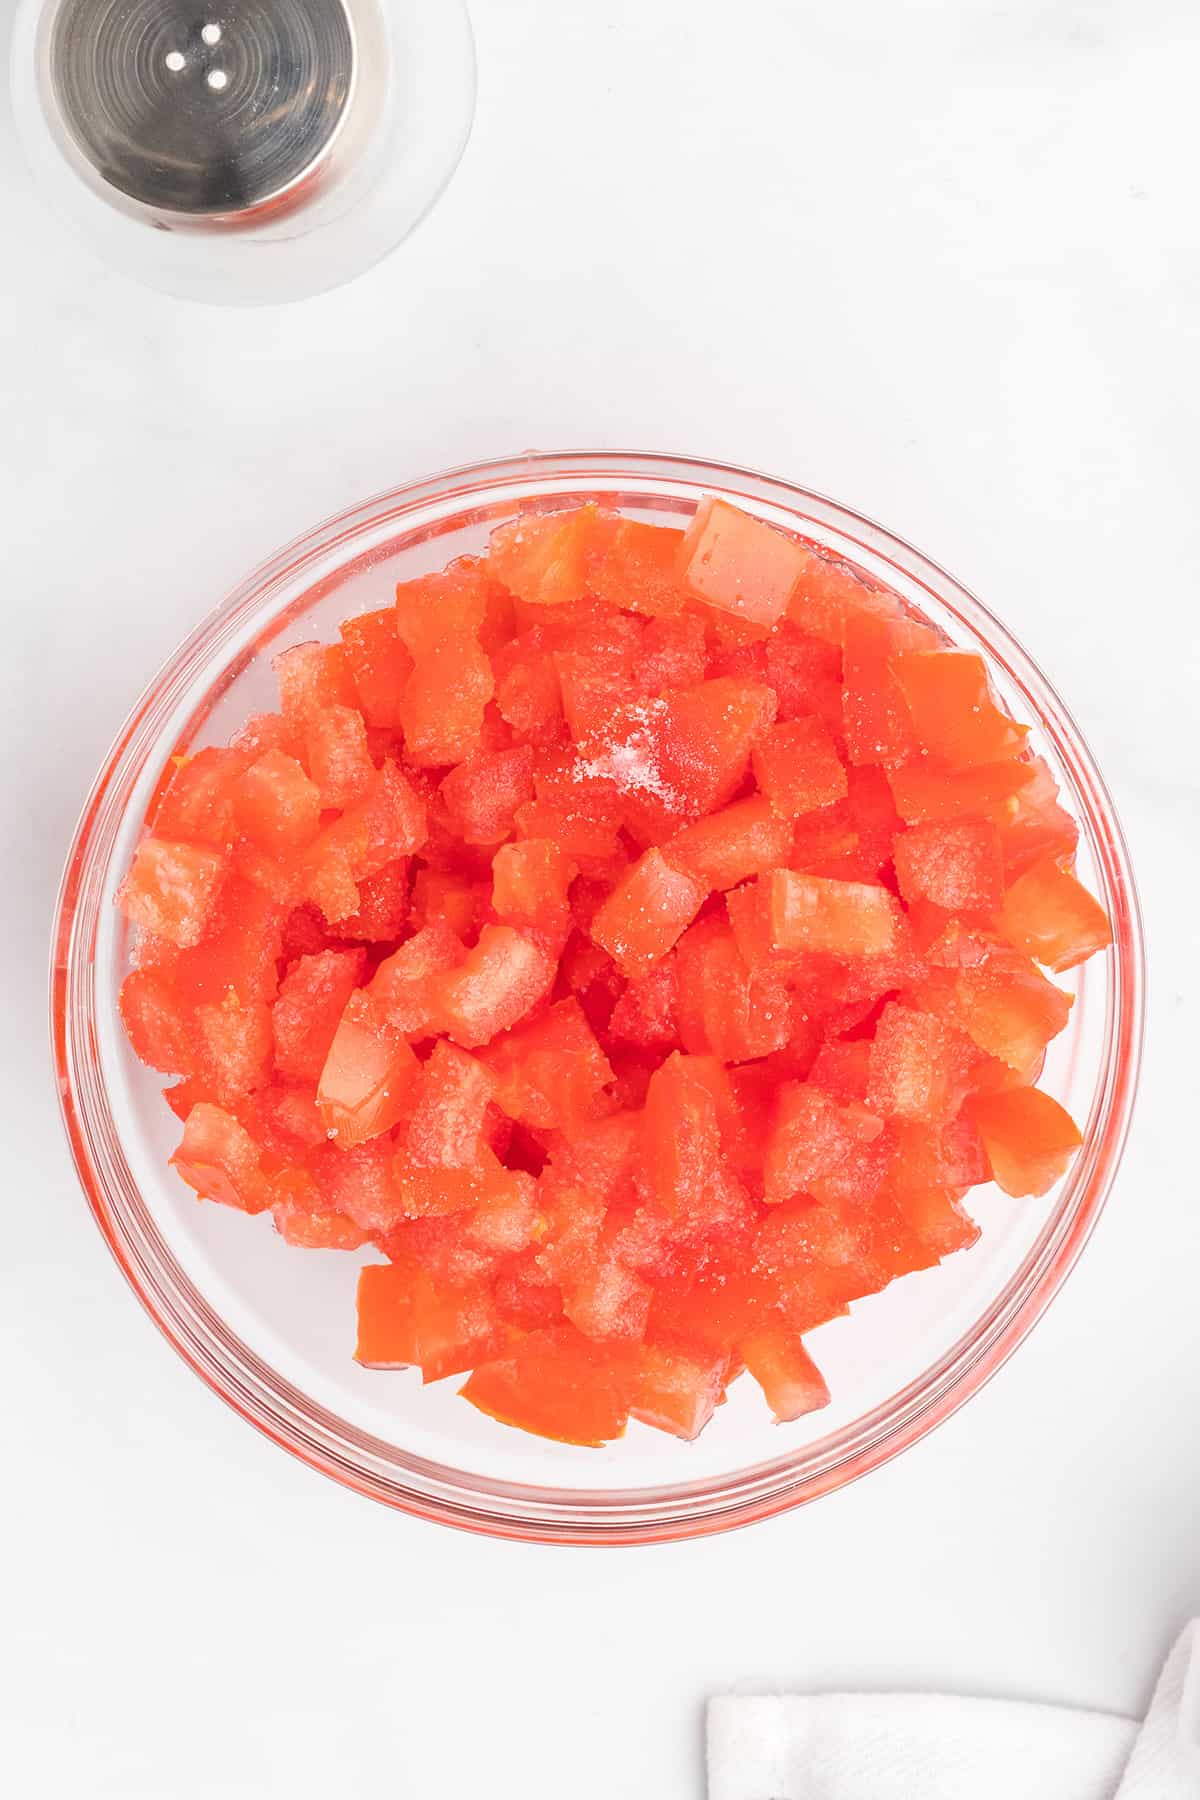 Diced tomatoes in a mixing bowl.